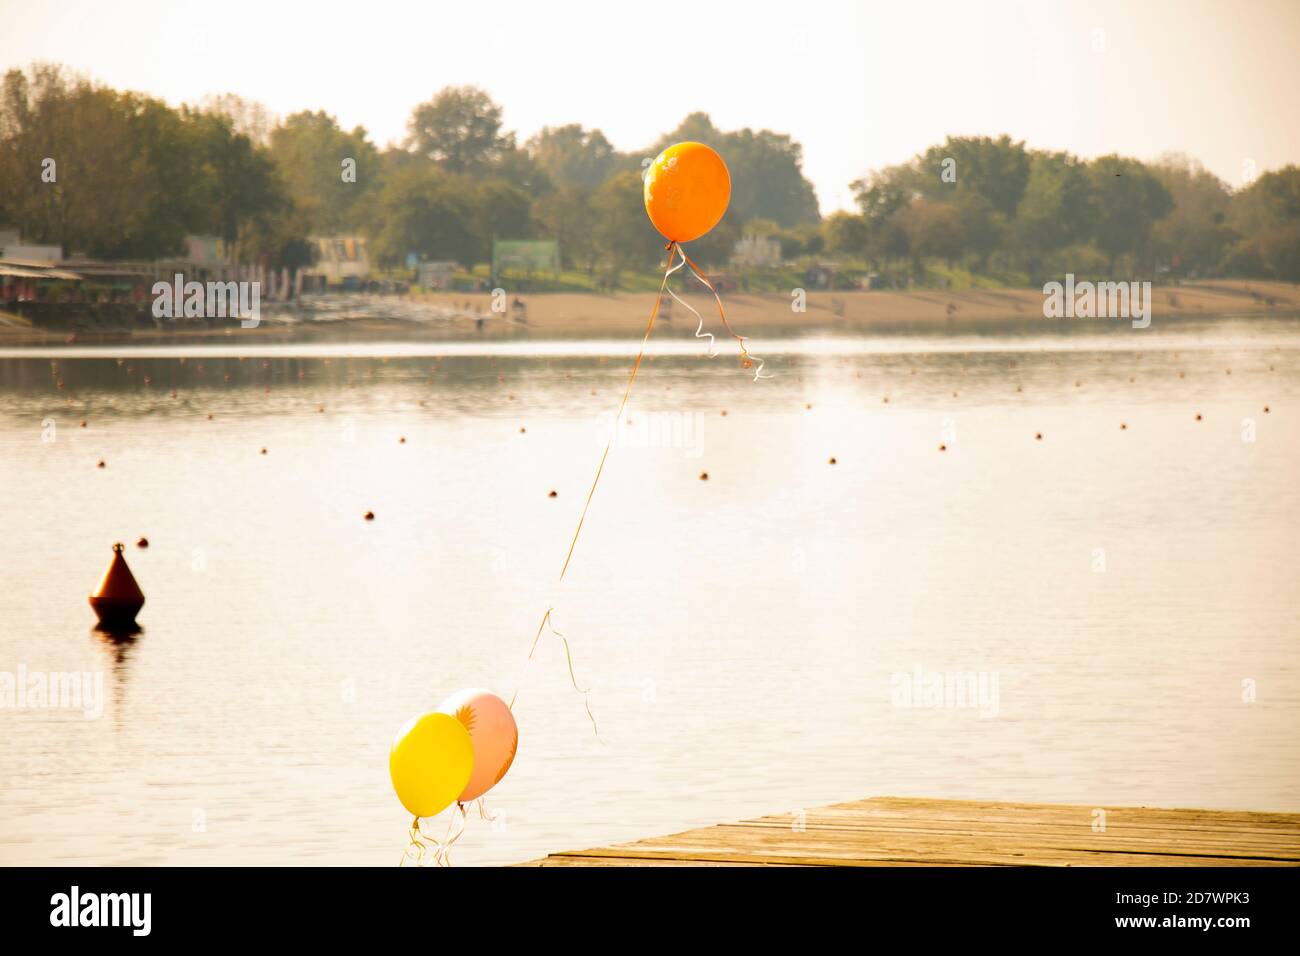 Celebration balloons tied up on a pier on a lake in sunset Stock Photo